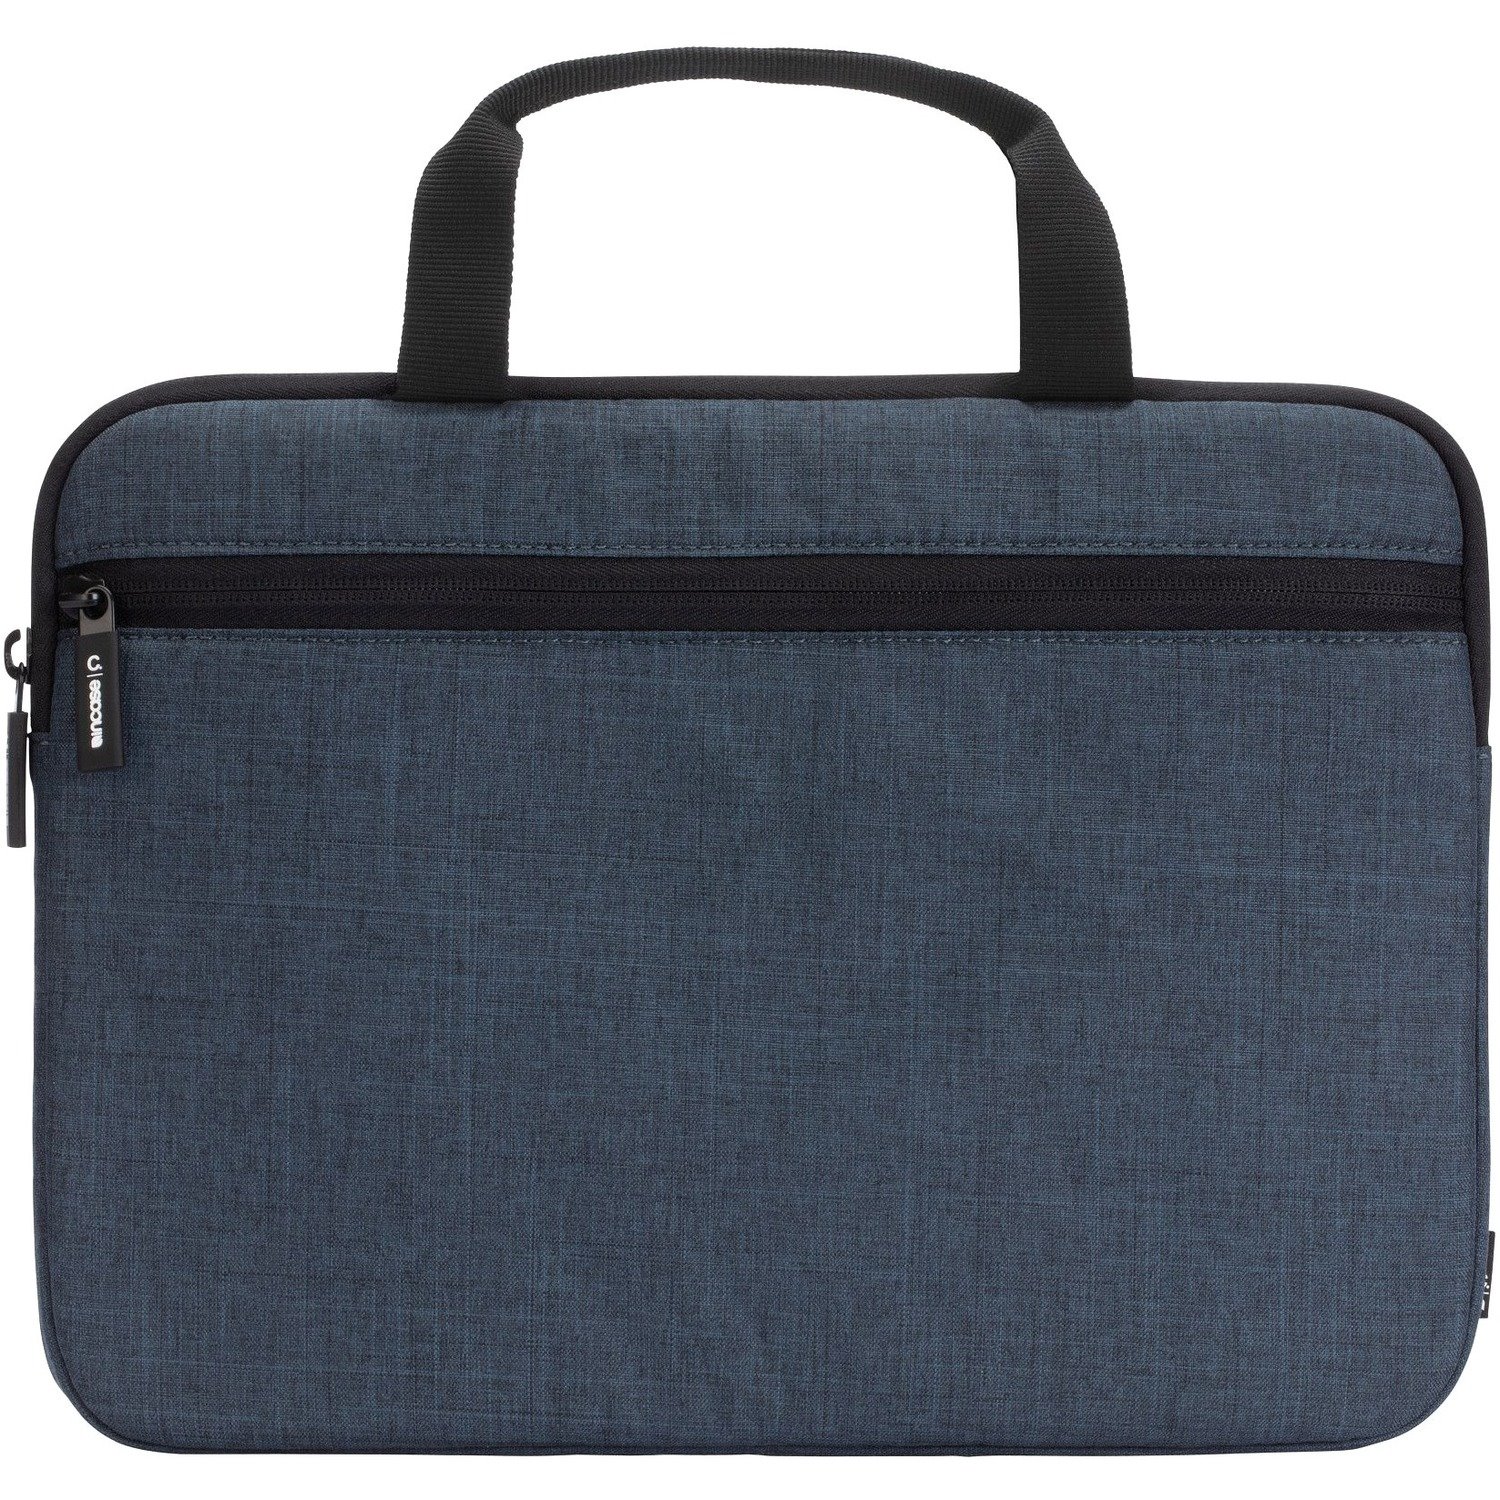 Incase Carrying Case (Briefcase) for 33 cm (13") Notebook - Blue